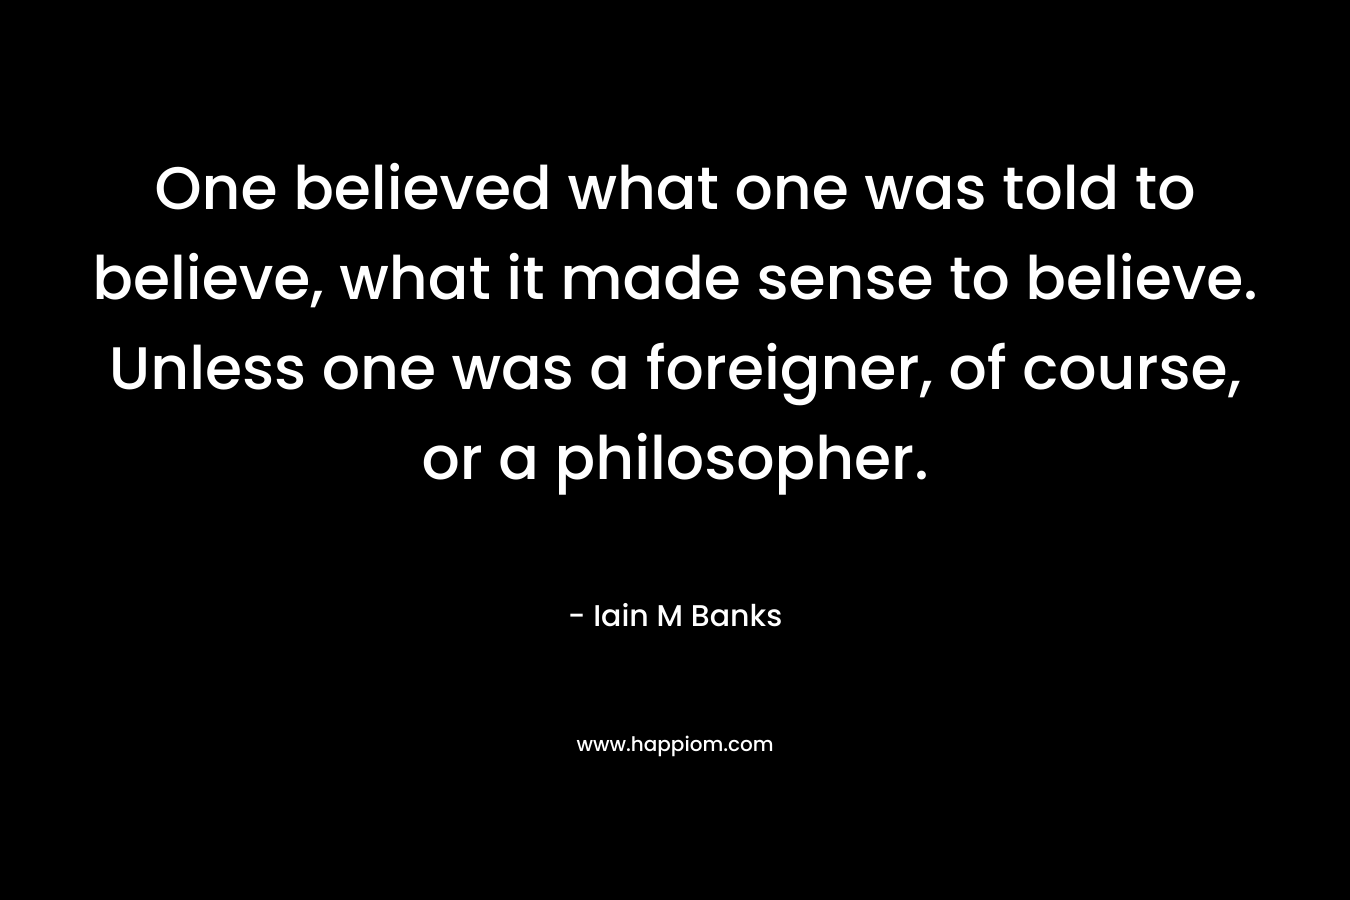 One believed what one was told to believe, what it made sense to believe. Unless one was a foreigner, of course, or a philosopher. – Iain M Banks